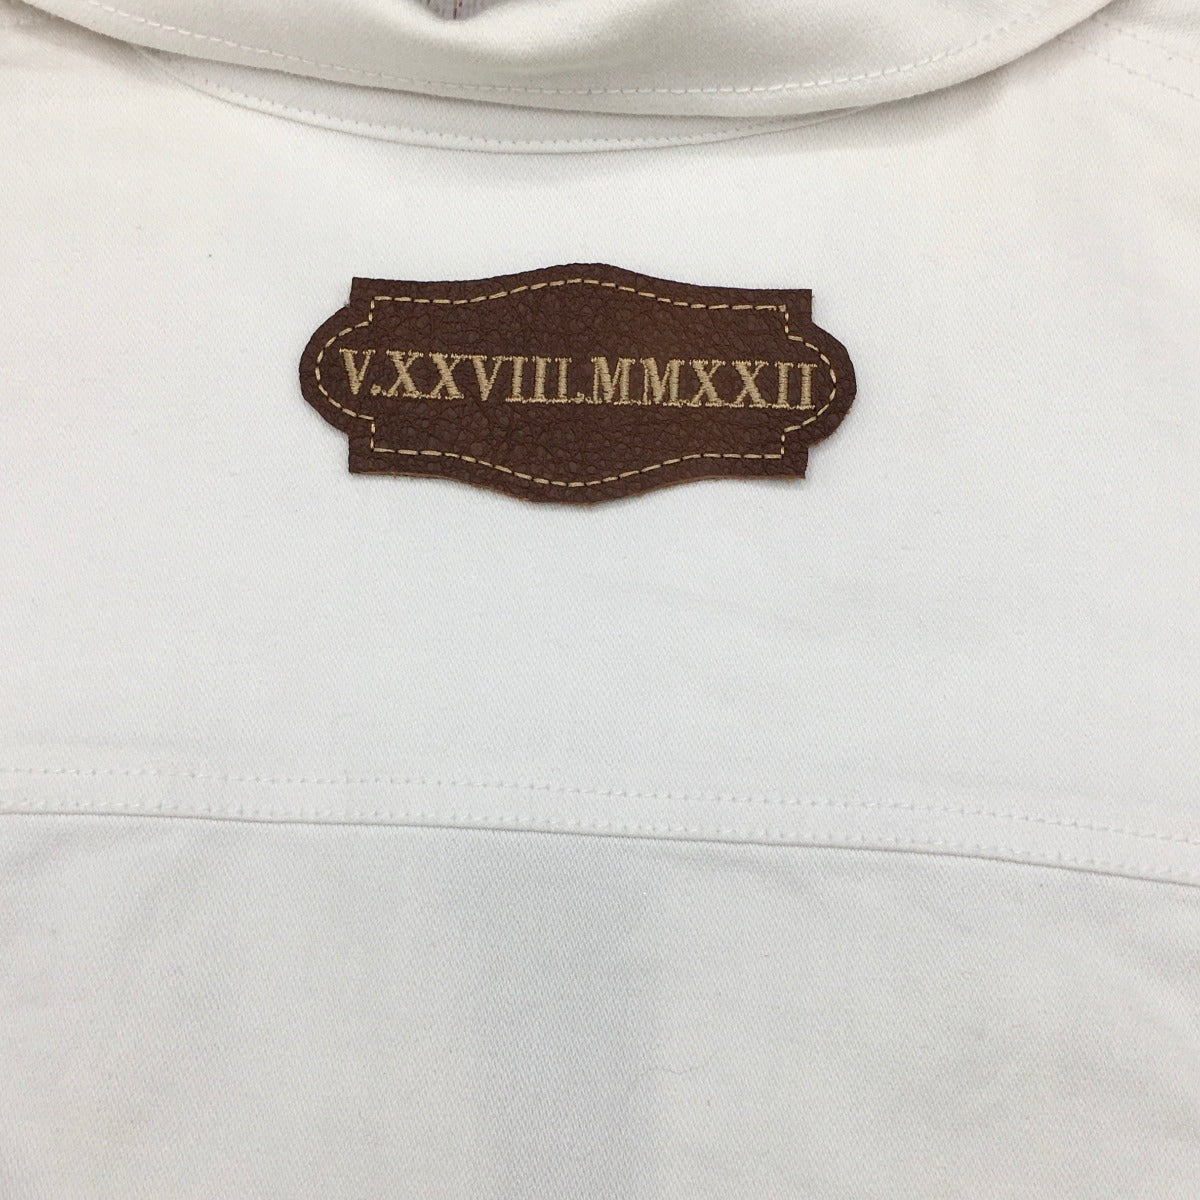 roman numeral date patch on clothing